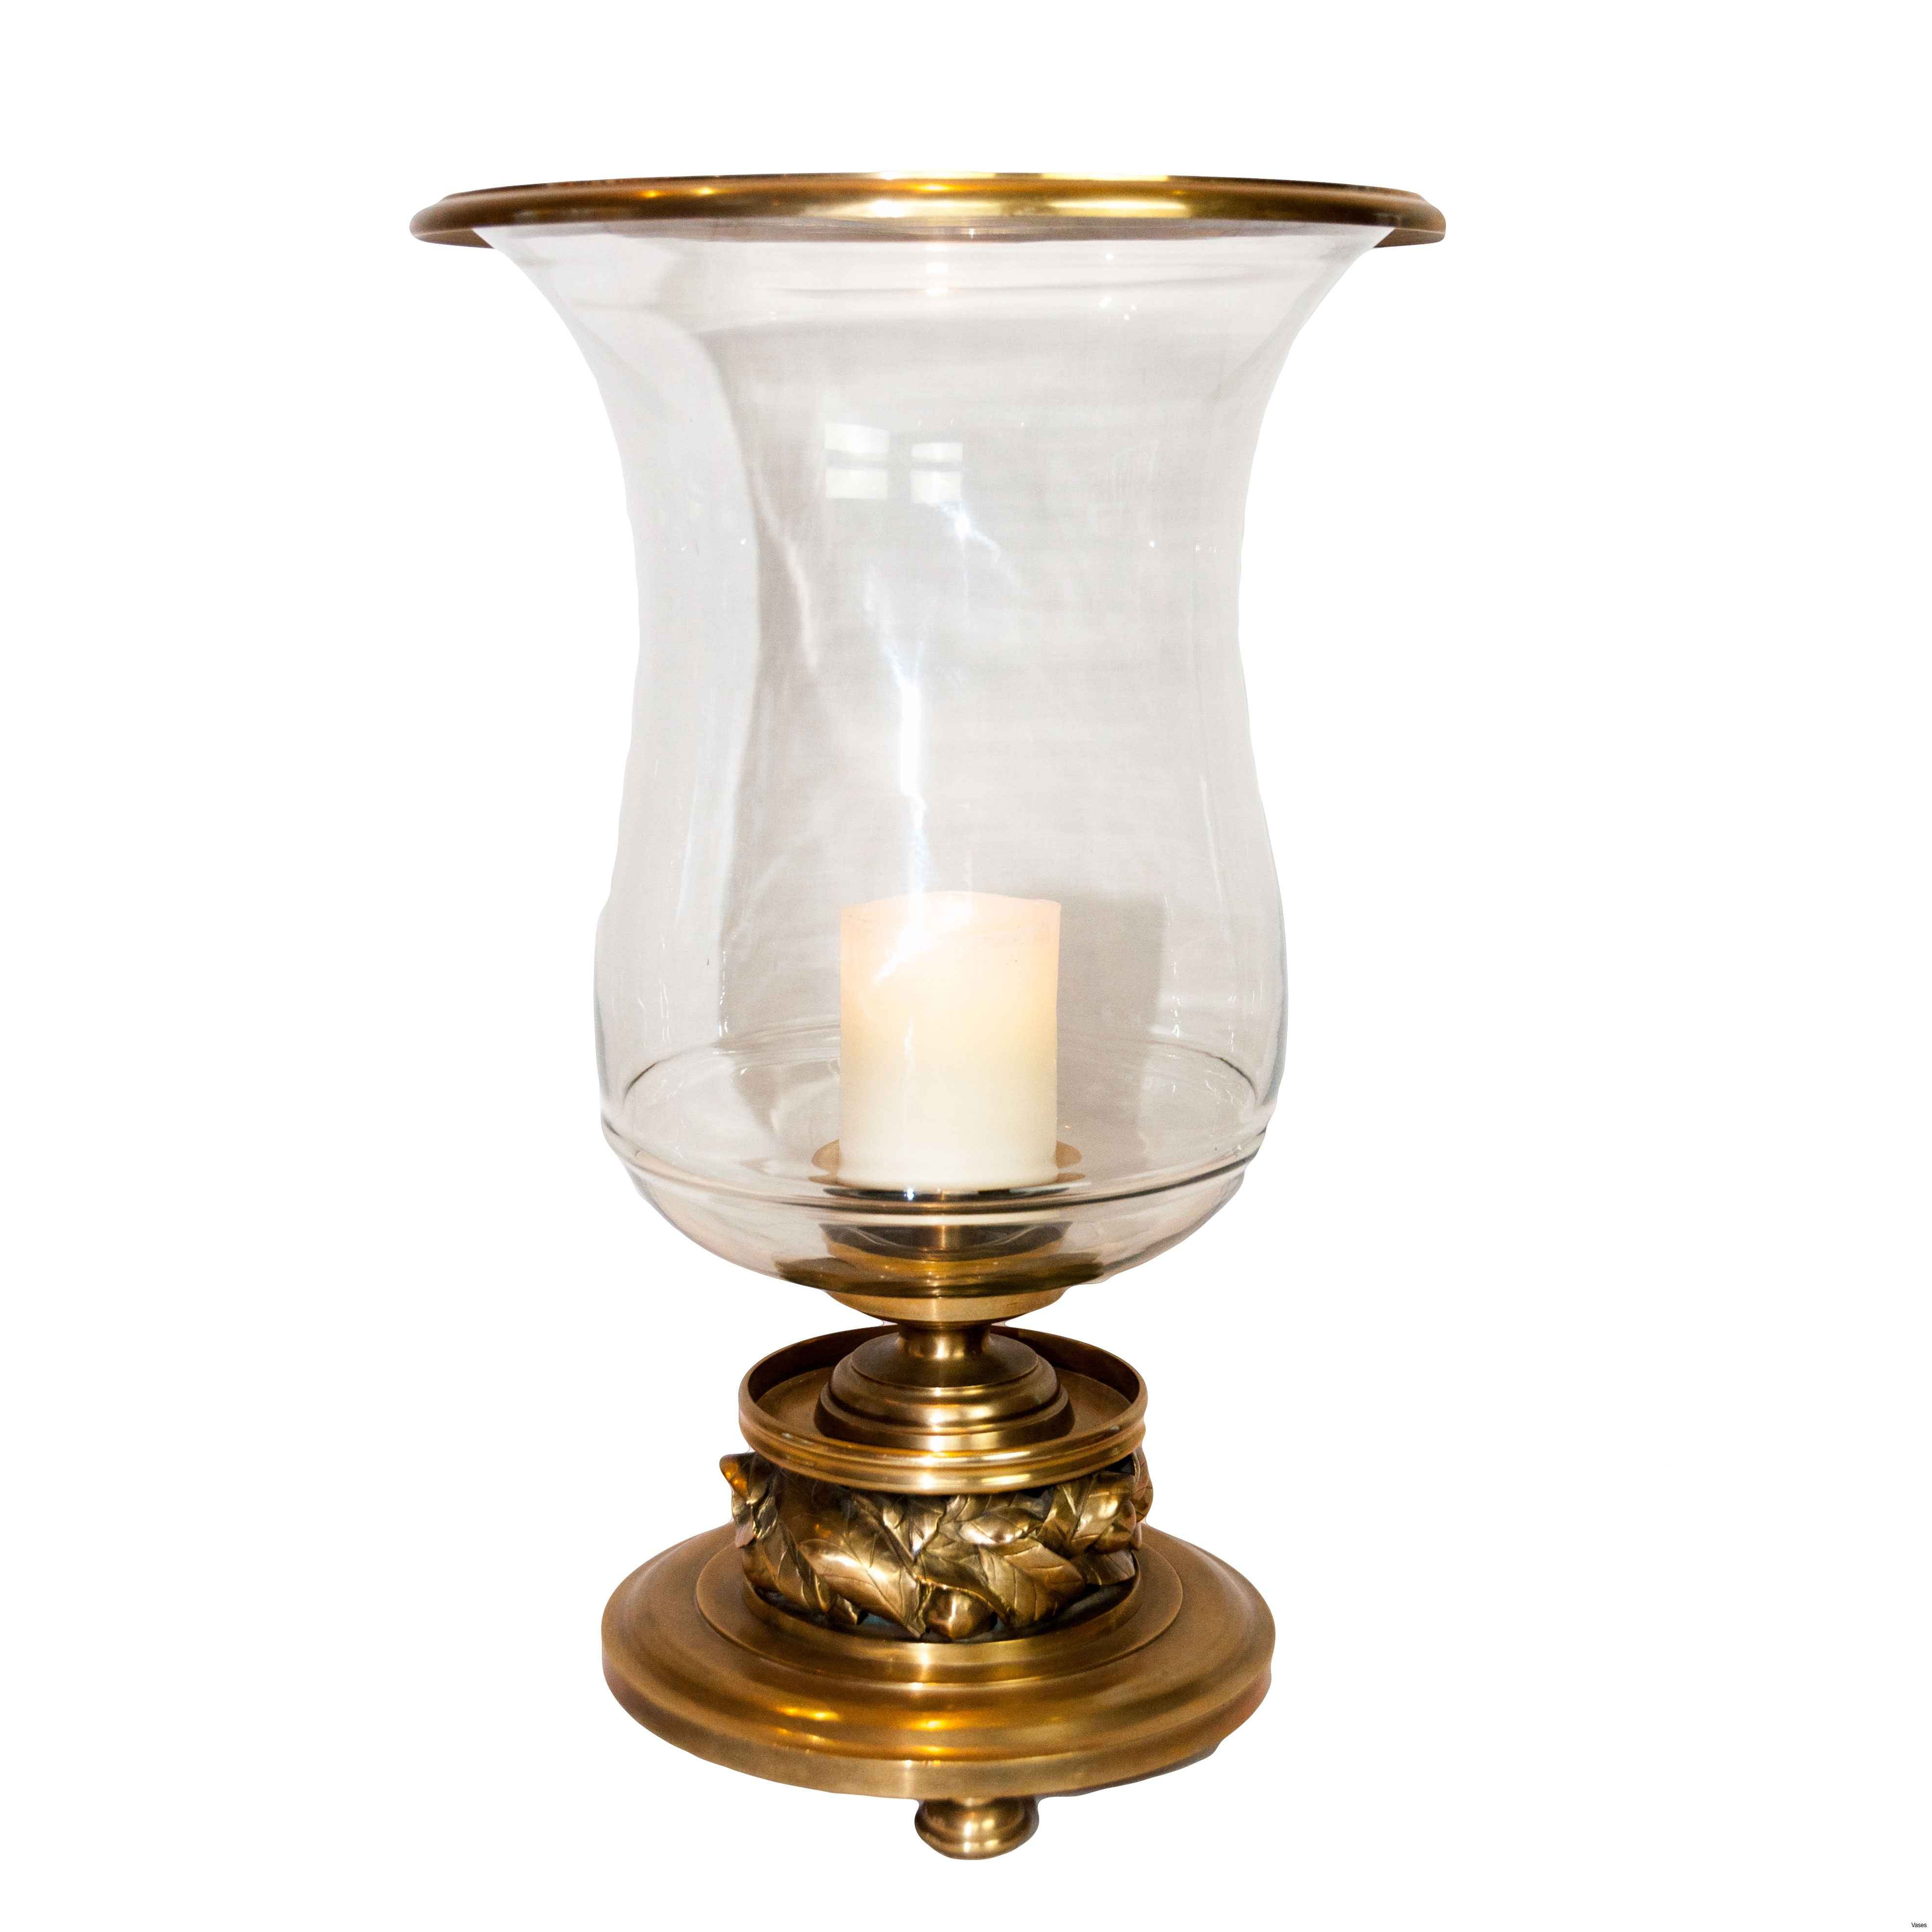 25 attractive Candle Vases In Bulk 2024 free download candle vases in bulk of candle stands wholesale fresh candle holder wholesale glass votive pertaining to candle stands wholesale fresh candle holder wholesale glass votive candle holders bea